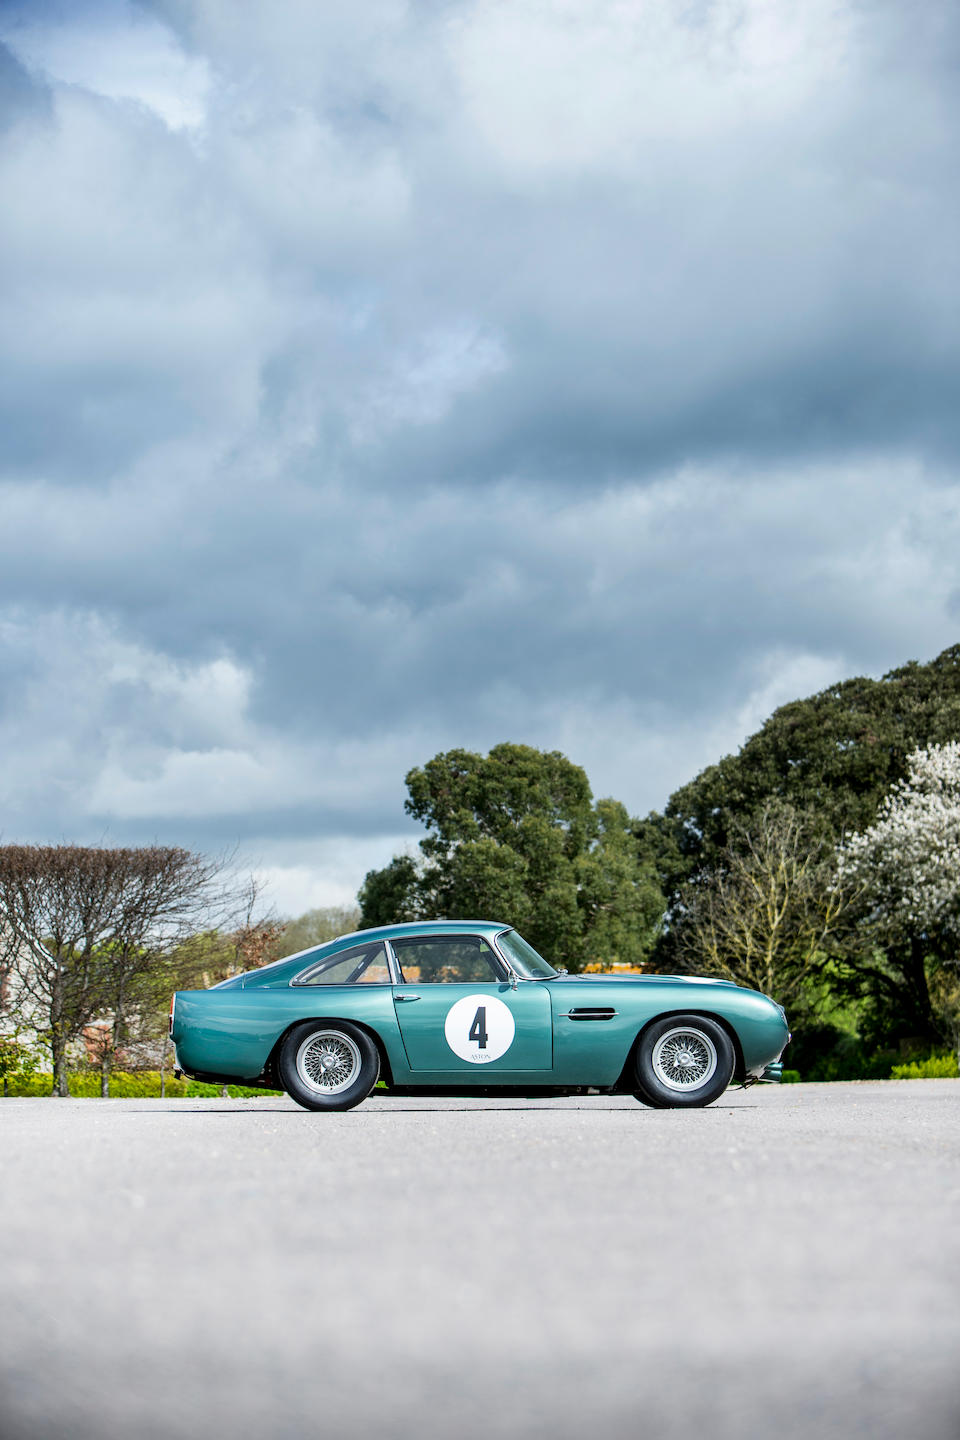 The ex-Peter Thornton, Ian Dalglish actively and successfully campaigned,1960 Aston Martin DB4 GT  Chassis no. 370/0110/GT (original engine offered with motor car); and a race unit installed with no number.